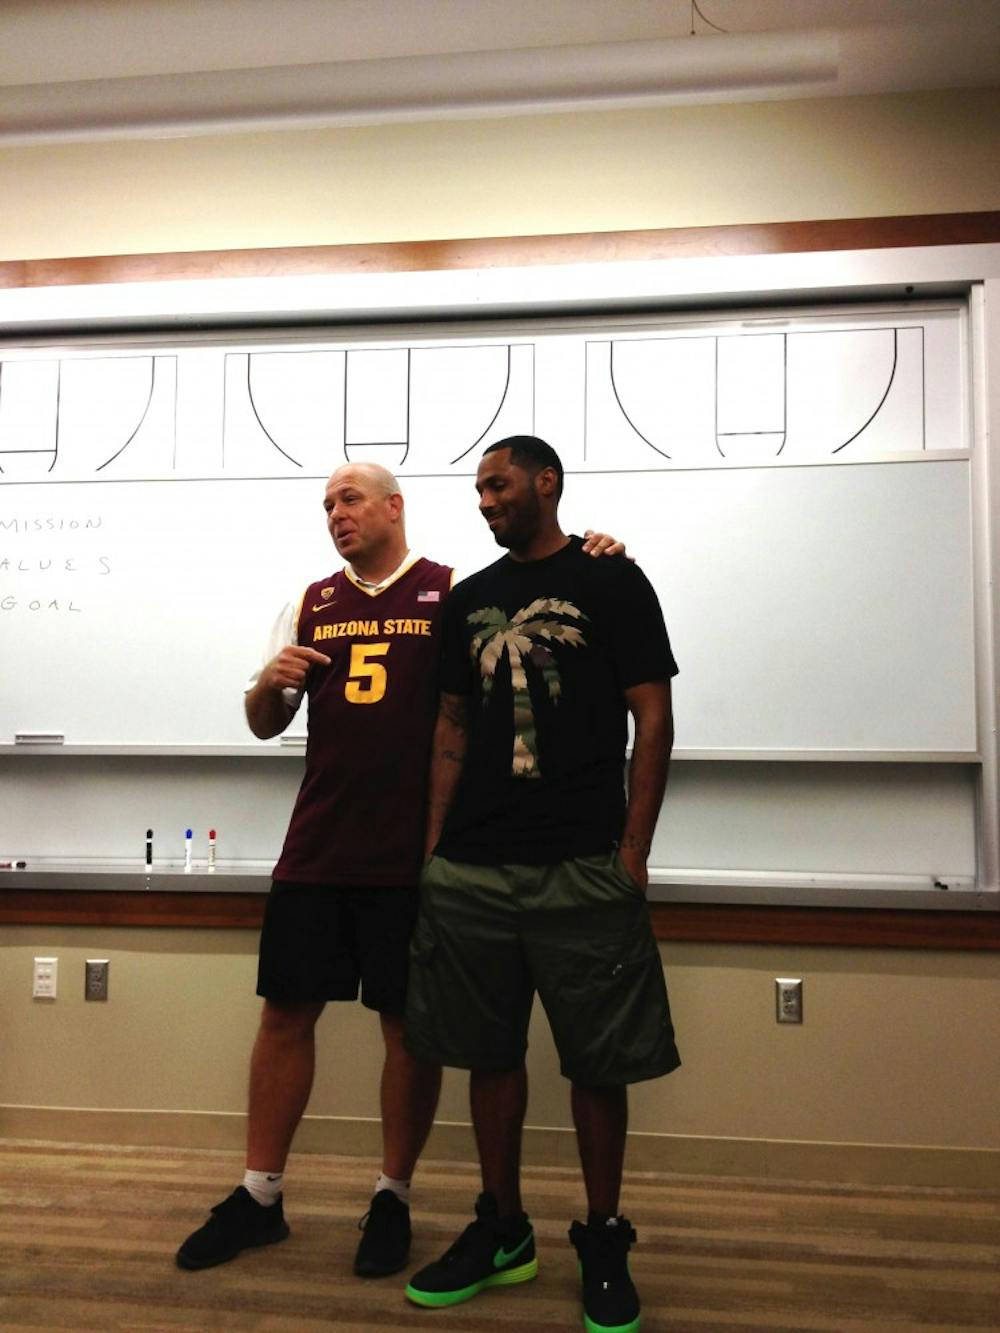 Head basketball coach Herb Sendek and Eddie House stand together in the press room at ASU’s Tempe campus. Sendek announced that House’s jersey is to be retired sometime during the 2013-14 season. (Photo by Nicholas Palomino Mendoza.)